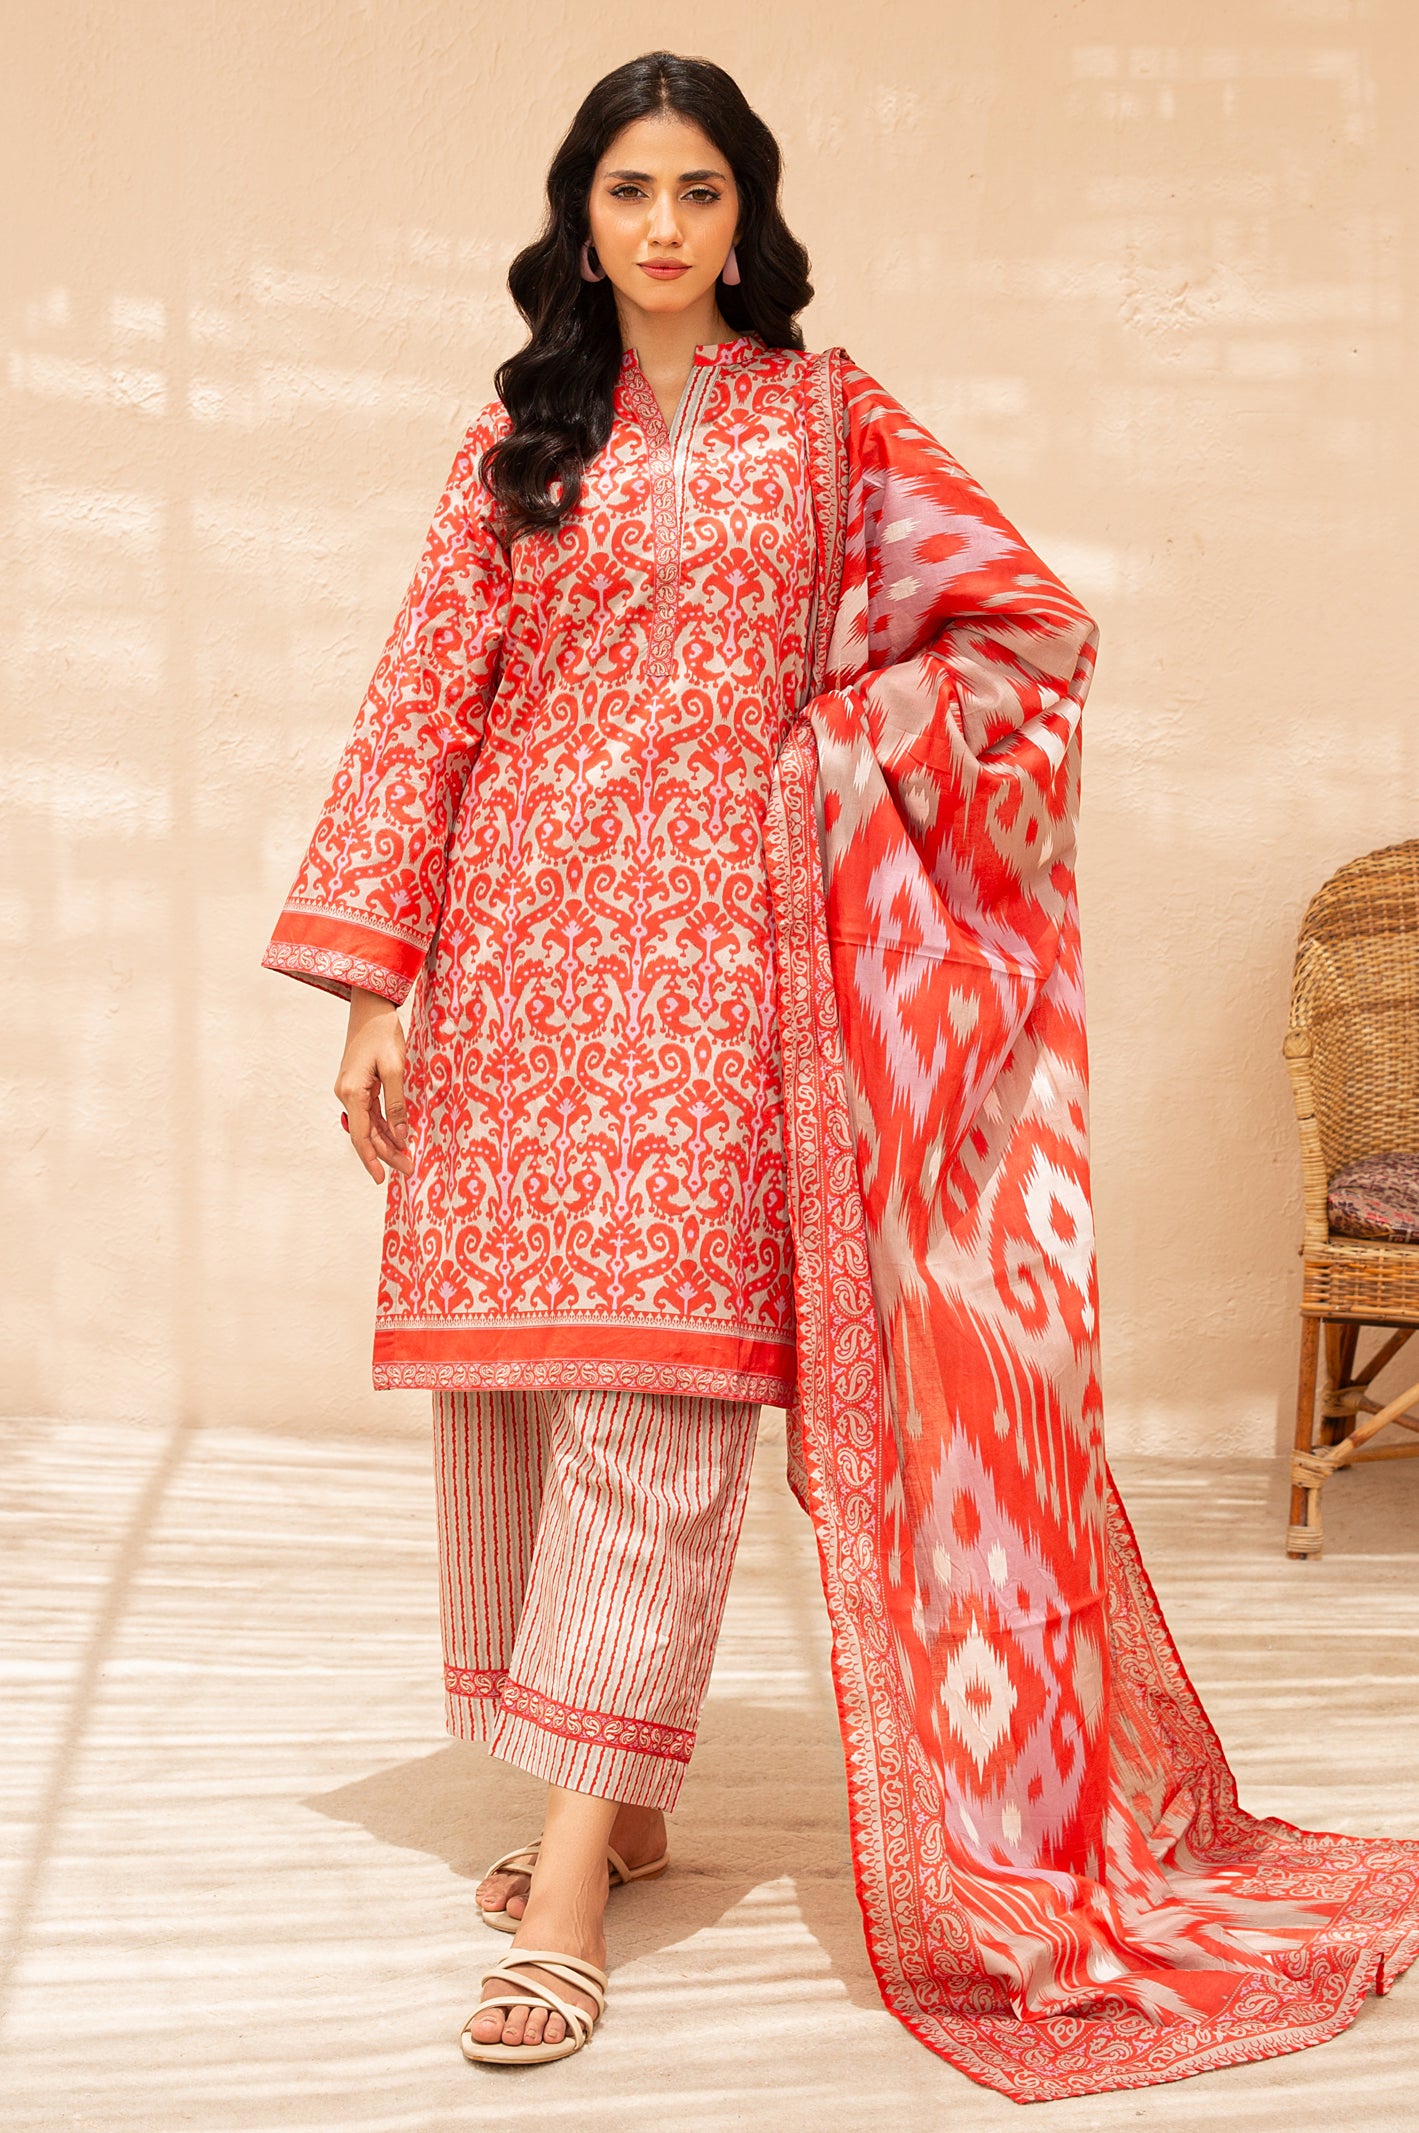 3PC Printed Suit From Diners